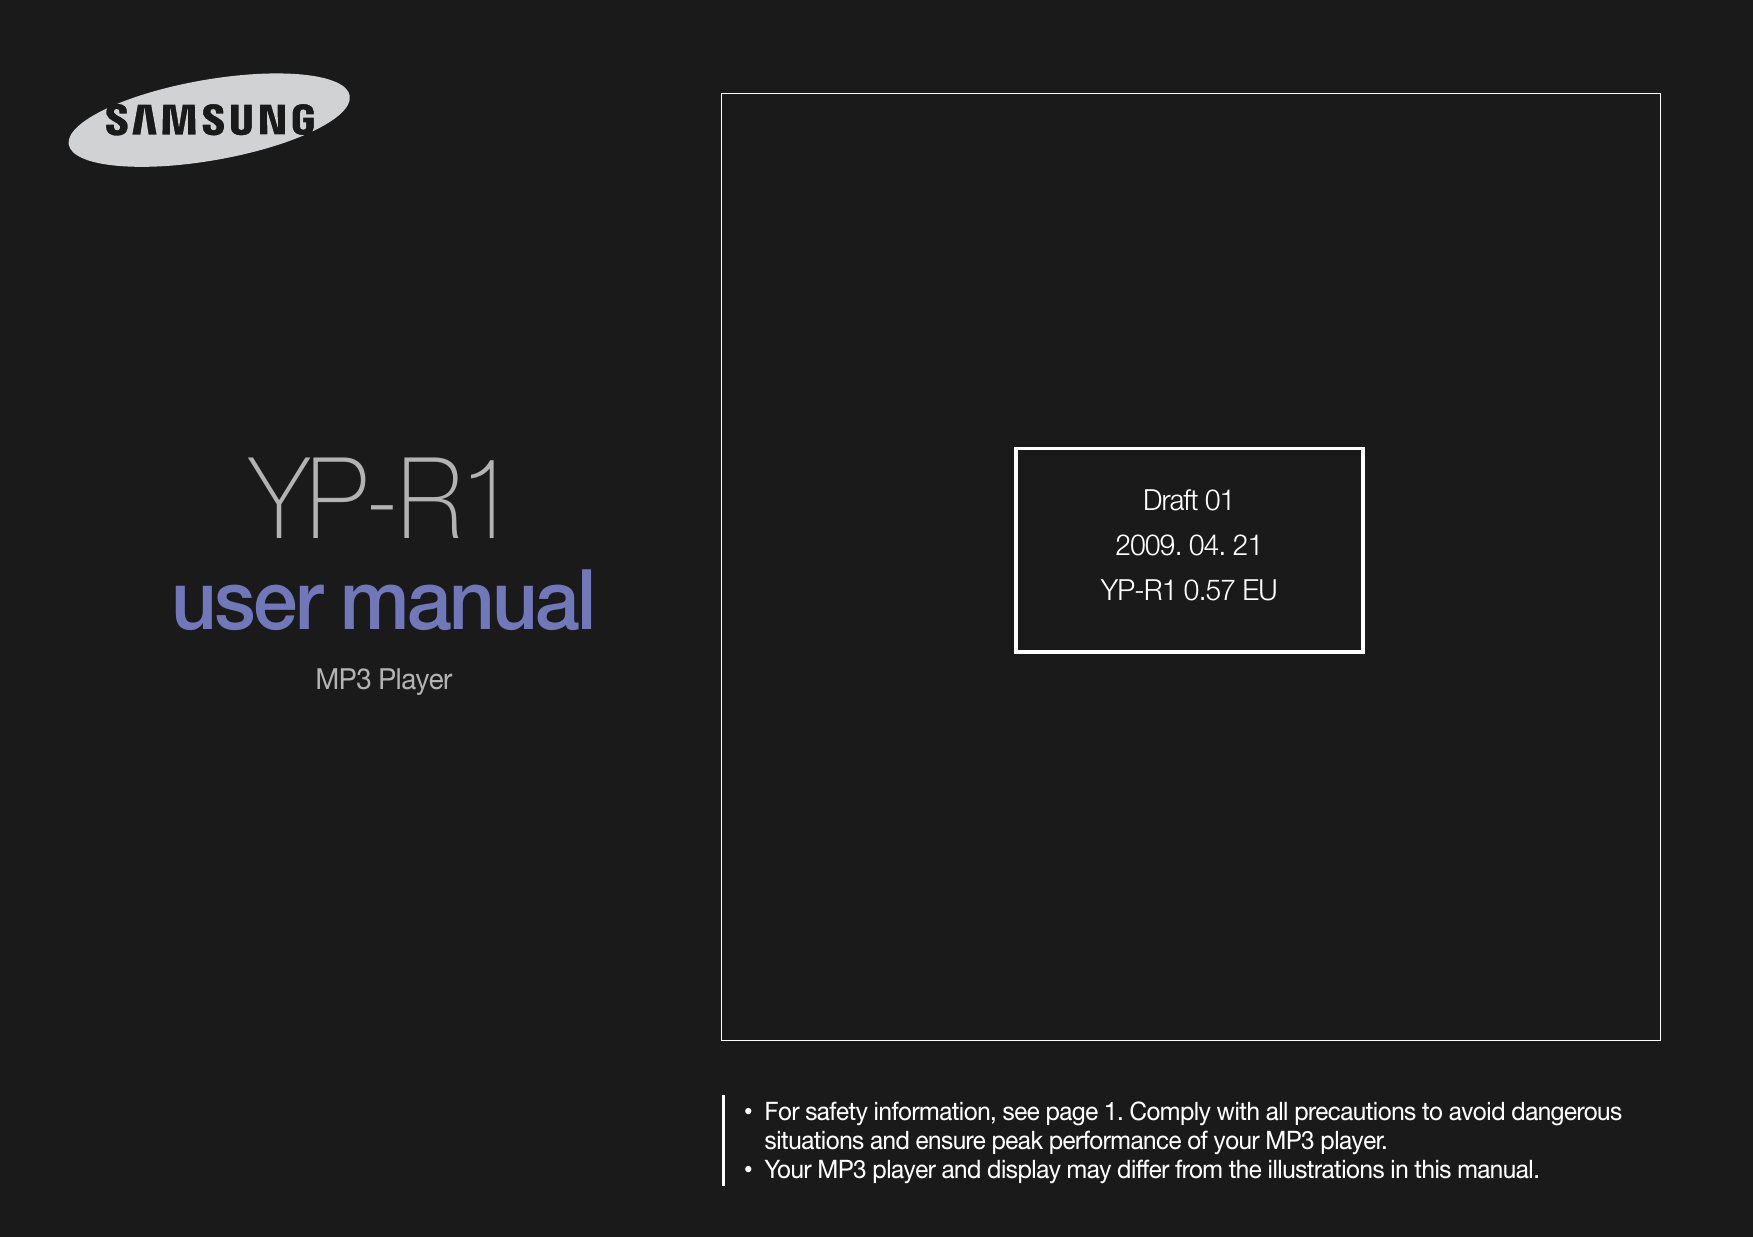 YP-R1user manualMP3 PlayerFor safety information, see page •  1. Comply with all precautions to avoid dangerous situations and ensure peak performance of your MP3 player.Your MP3 player and display may differ from the illustrations in this manual.• Draft 012009. 04. 21YP-R1 0.57 EU